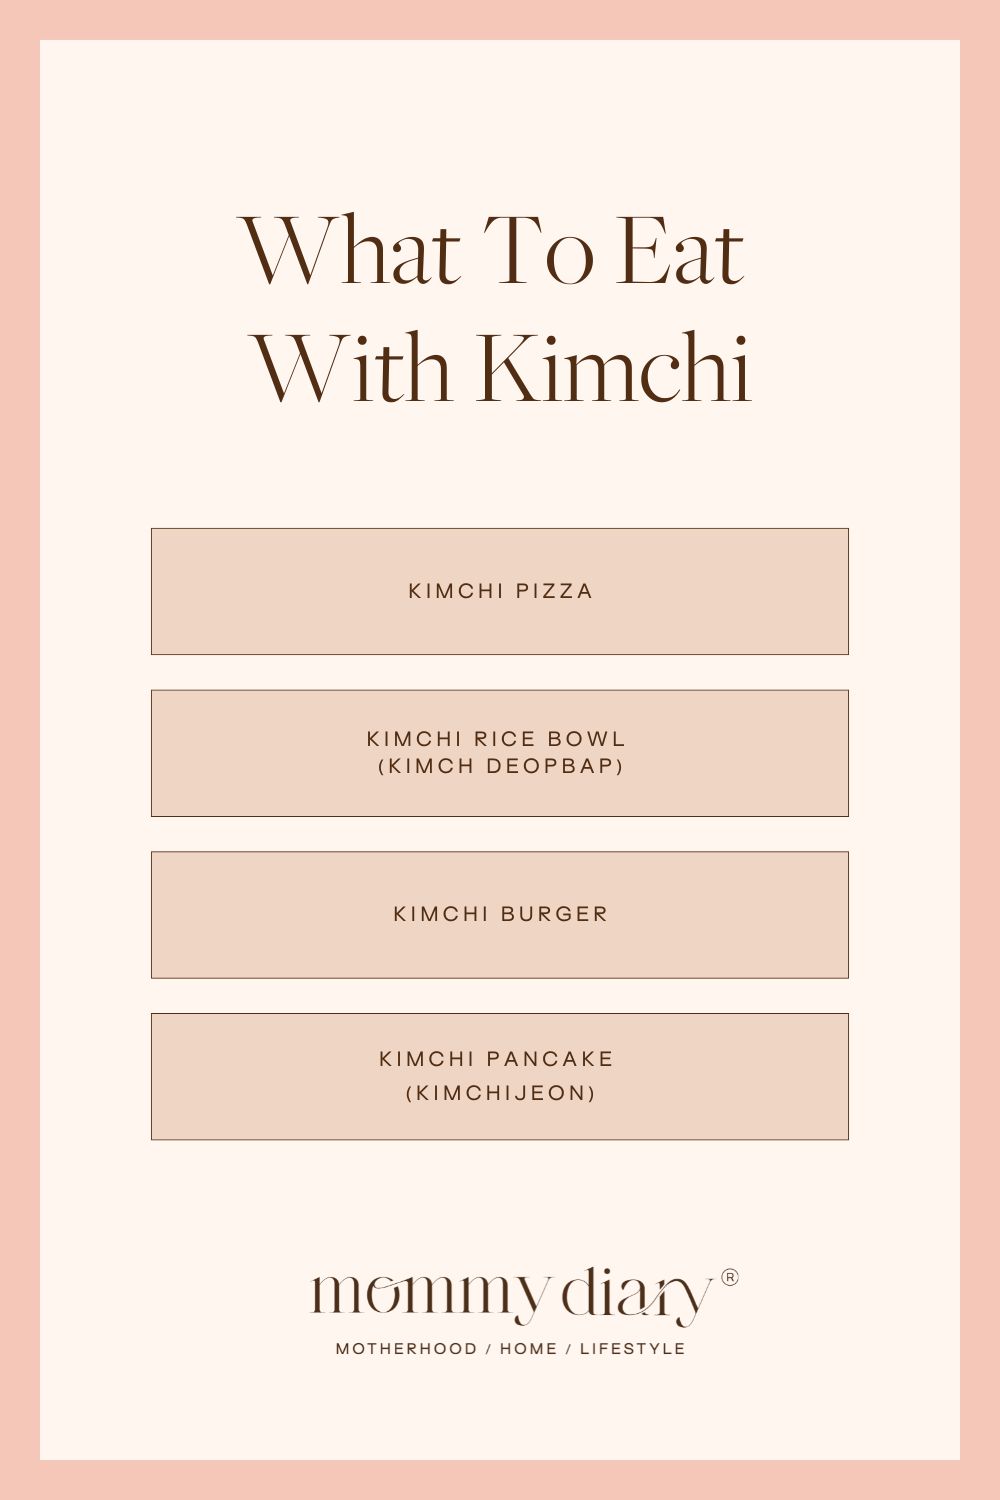 What To Eat With Kimchi